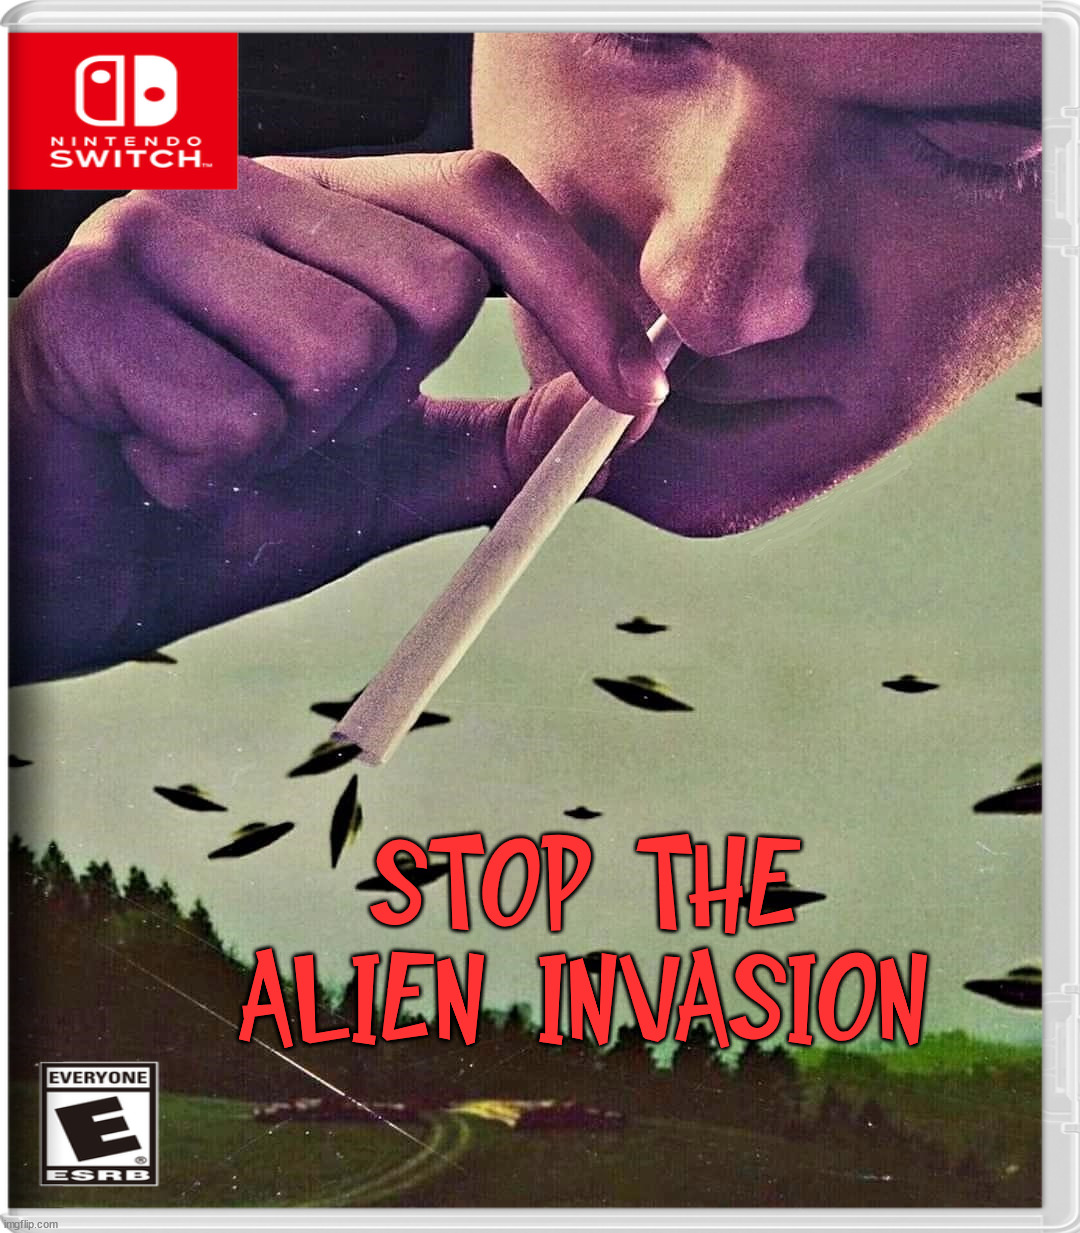 STOP THE ALIEN INVASION | image tagged in fake,nintendo switch | made w/ Imgflip meme maker